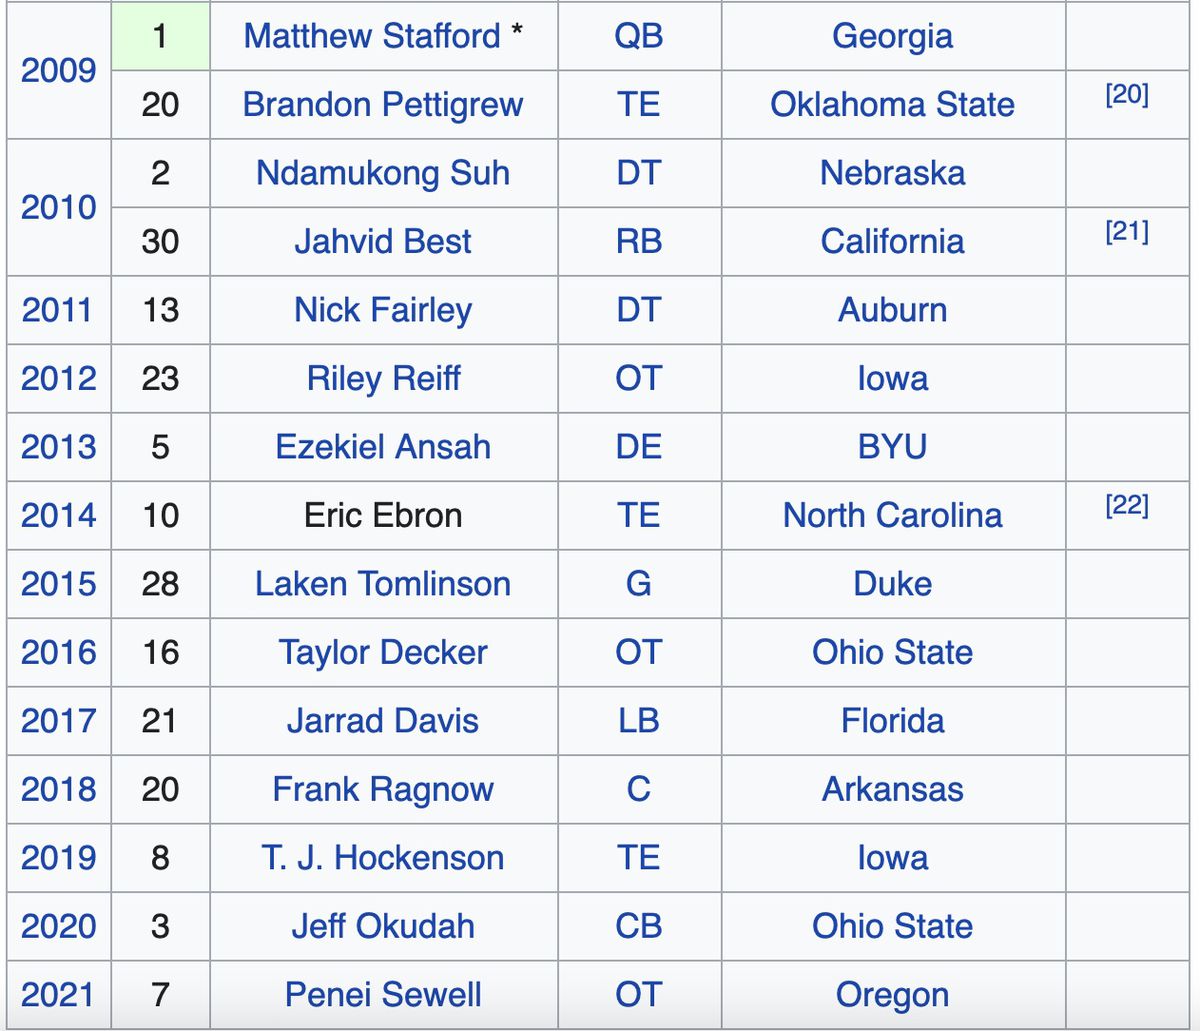 2022 nfl draft picks by team all rounds